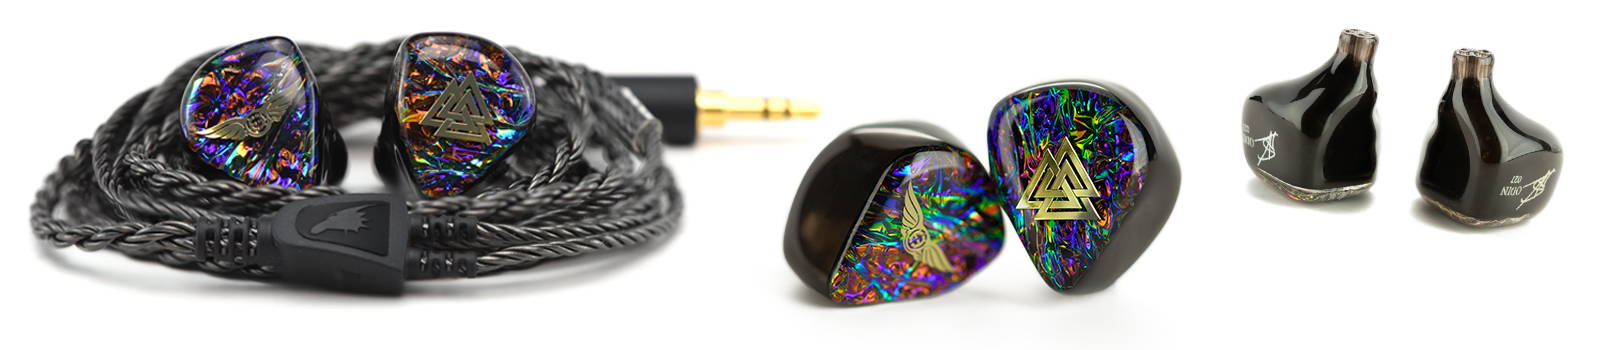 Empire Ears Odin IEM with Black Dragon IEM cable